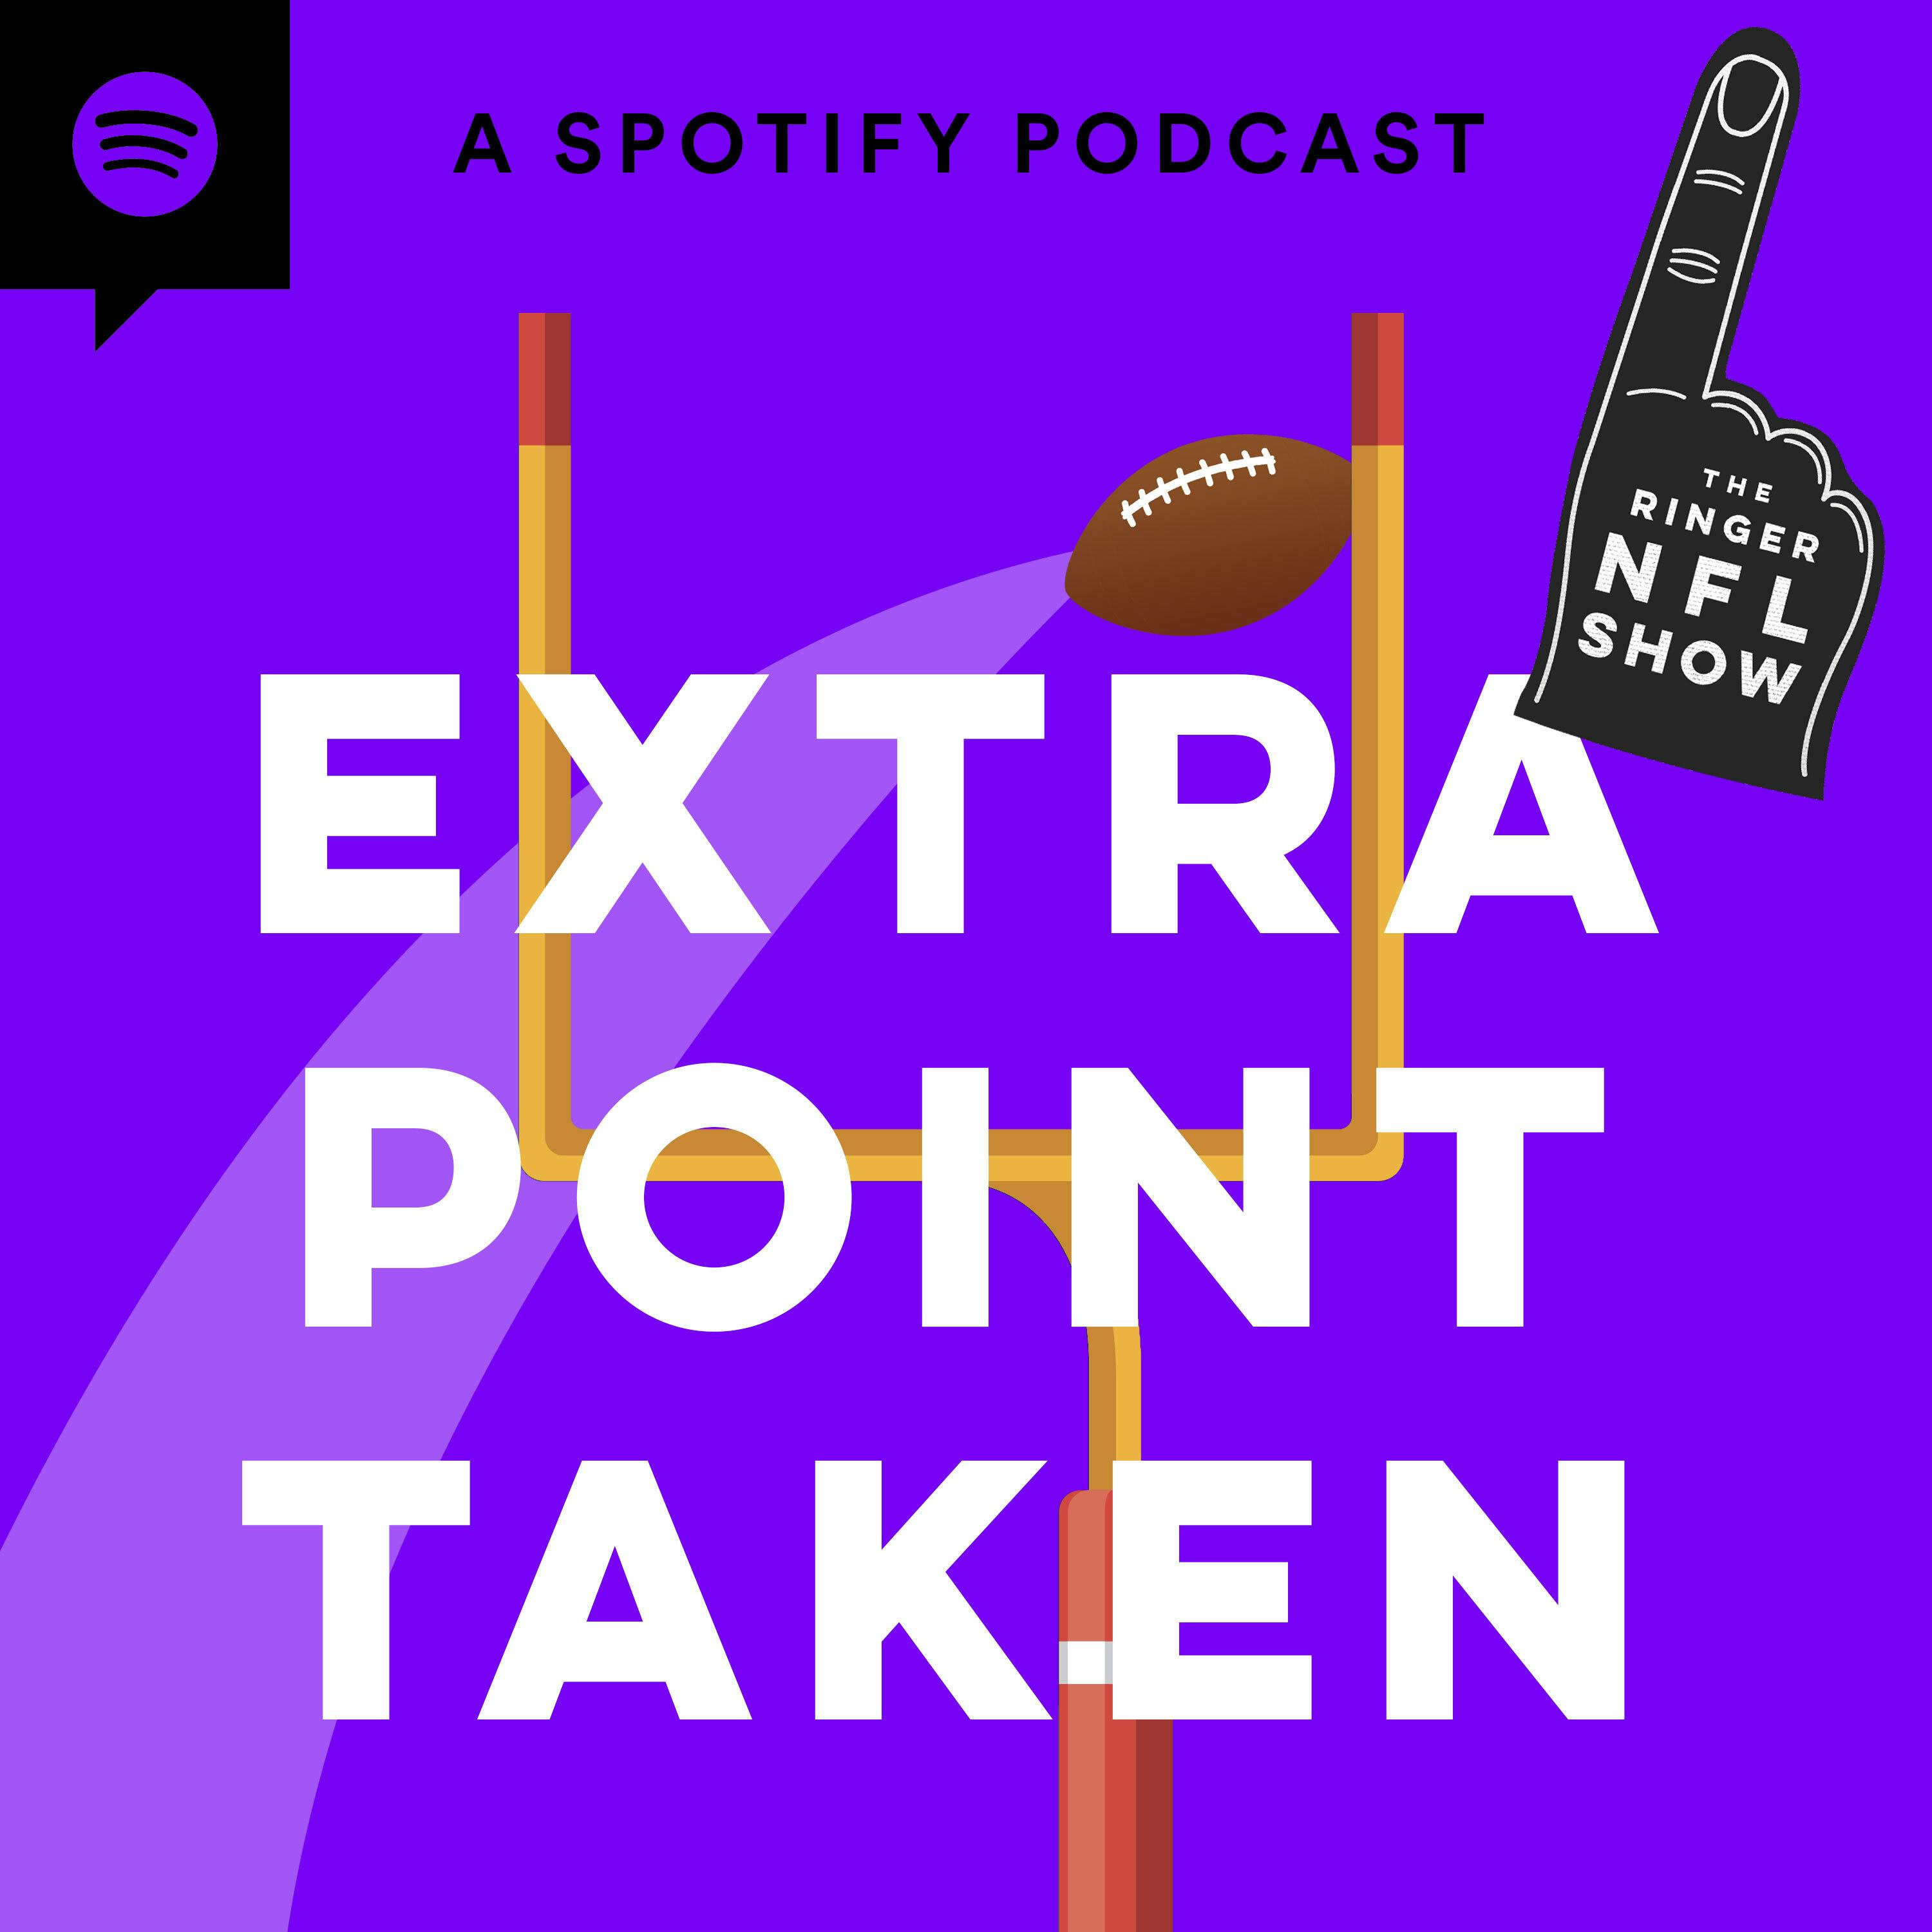 NFL Week 16 Picks, Props, and Predictions! | Extra Point Taken